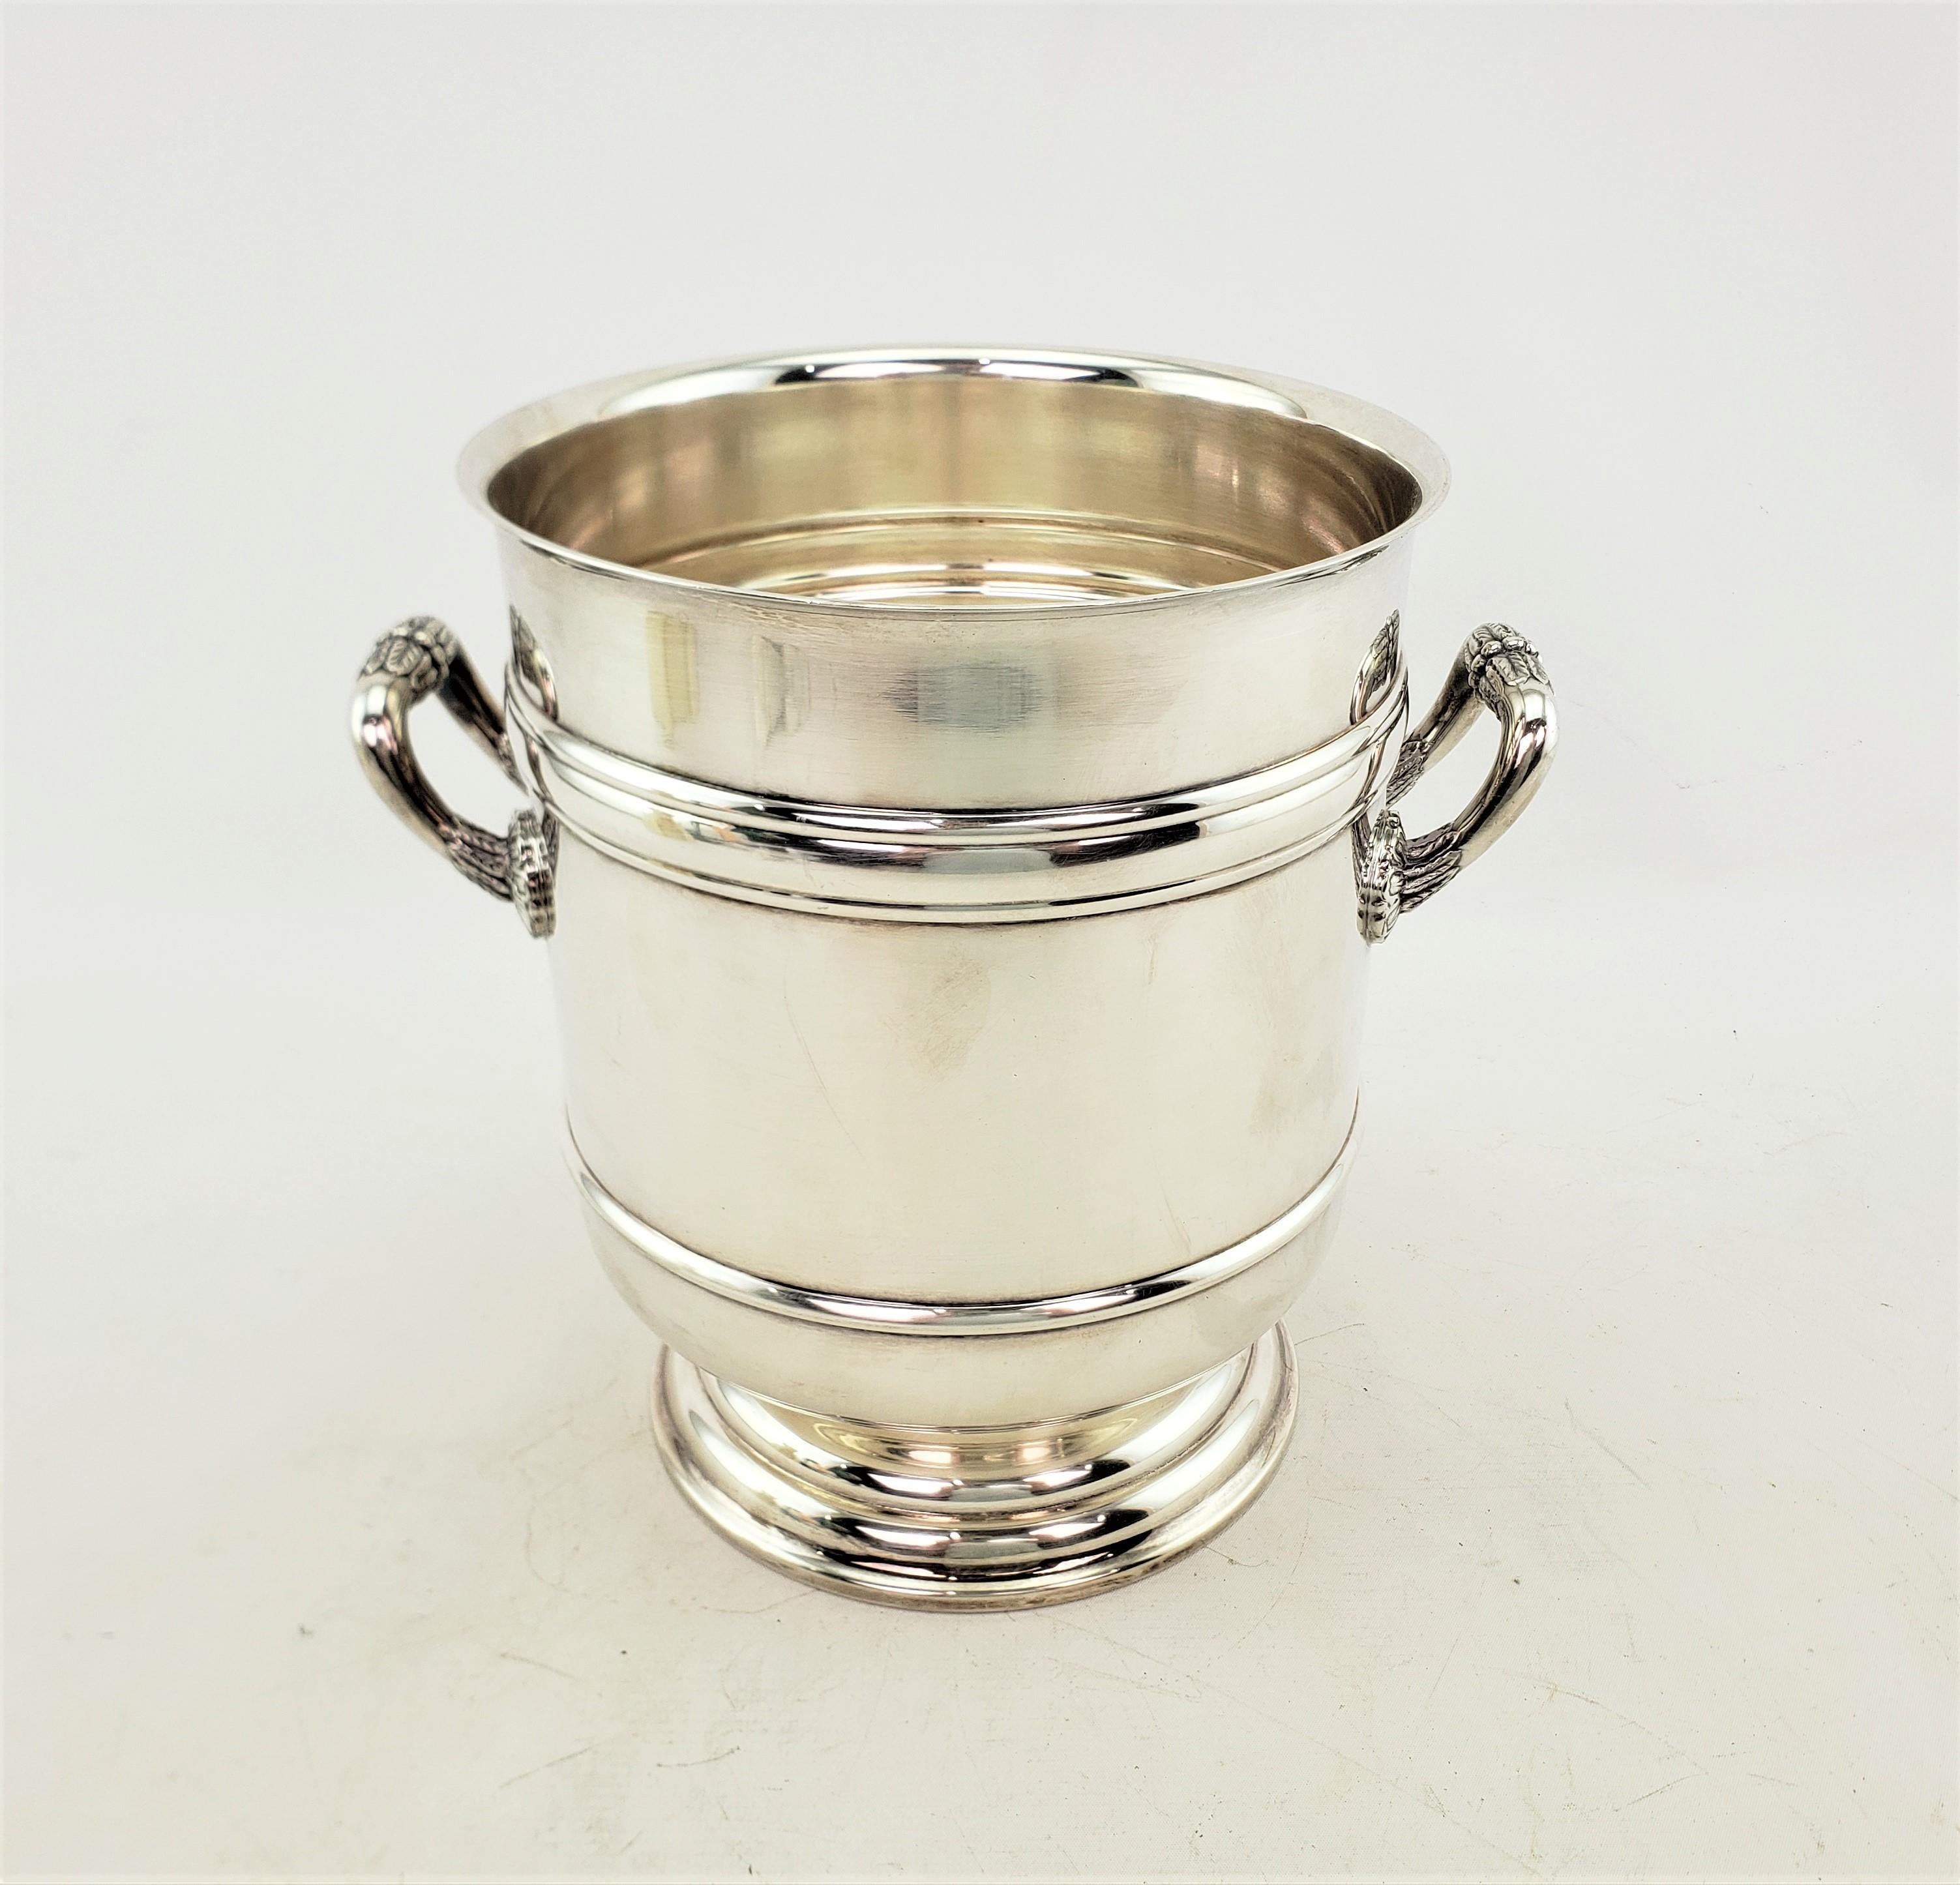 Mid-Century Era Christofle Silver Plated Ice Bucket or Bottle Chiller In Good Condition For Sale In Hamilton, Ontario